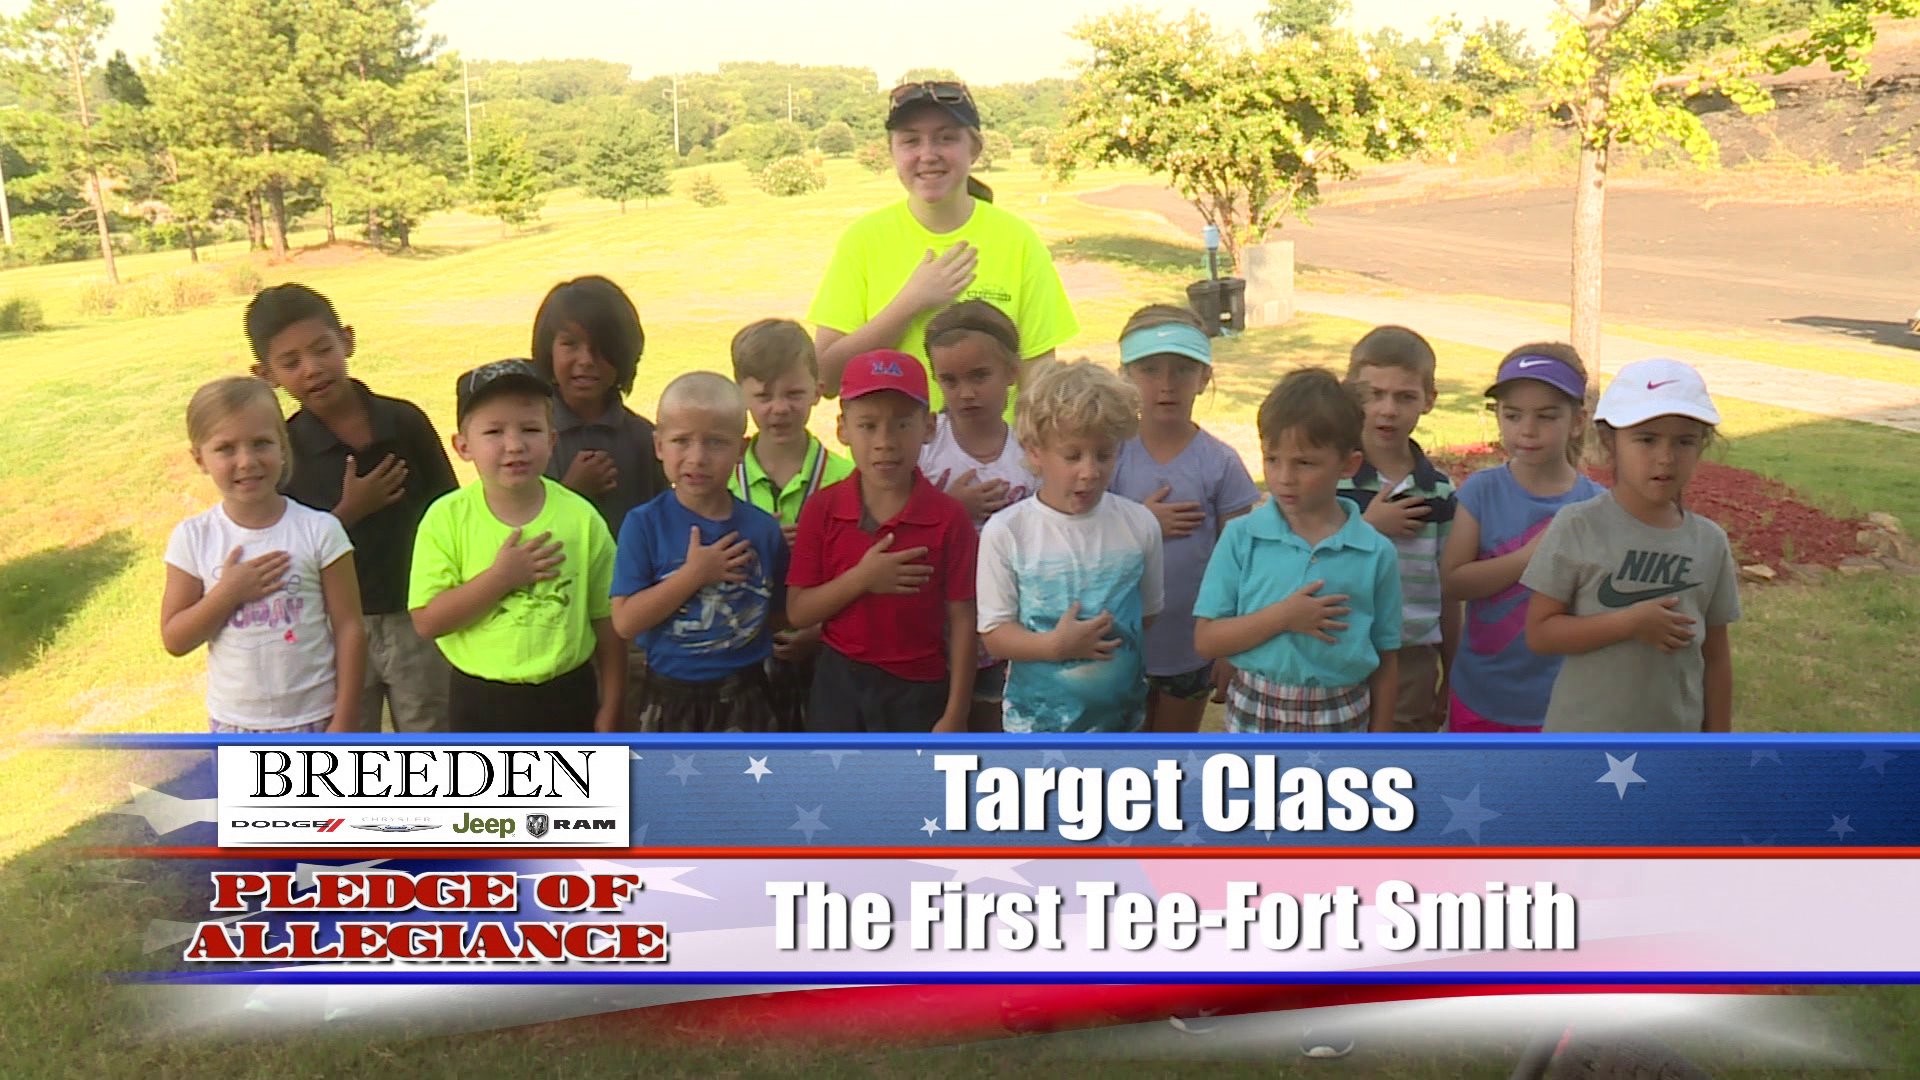 Target Class  The First Tee  Fort Smith